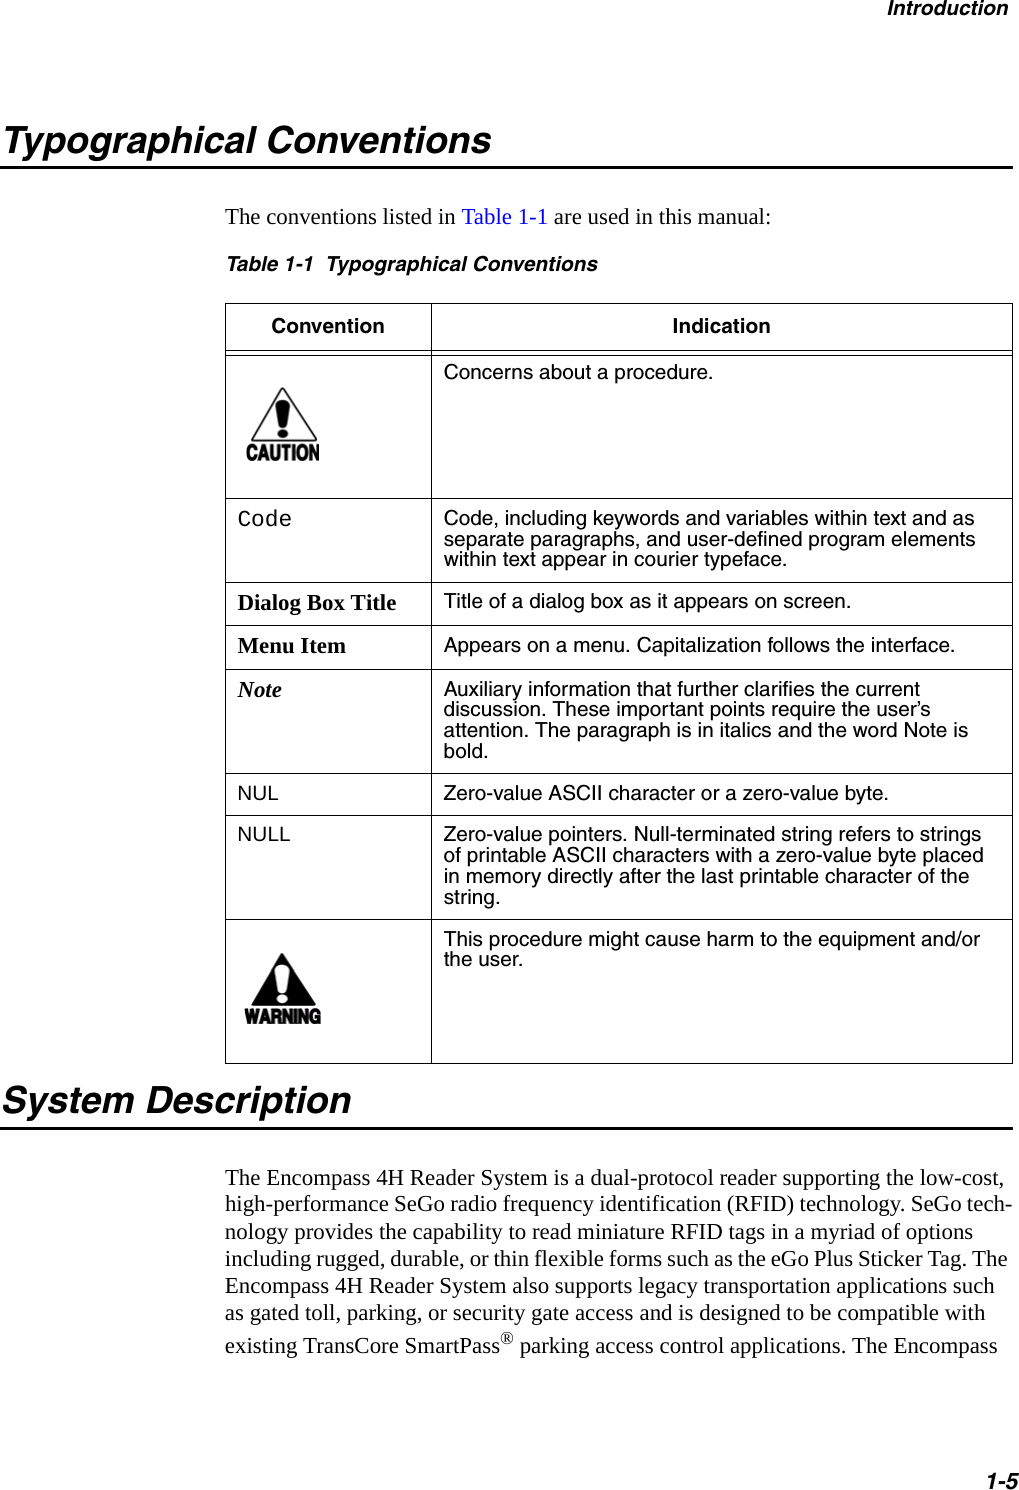 Introduction1-5Typographical ConventionsThe conventions listed in Table 1-1 are used in this manual:Table 1-1  Typographical ConventionsConvention IndicationConcerns about a procedure.Code Code, including keywords and variables within text and as separate paragraphs, and user-defined program elements within text appear in courier typeface.Dialog Box Title Title of a dialog box as it appears on screen.Menu Item Appears on a menu. Capitalization follows the interface.Note Auxiliary information that further clarifies the current discussion. These important points require the user’s attention. The paragraph is in italics and the word Note is bold.NUL Zero-value ASCII character or a zero-value byte.NULL Zero-value pointers. Null-terminated string refers to strings of printable ASCII characters with a zero-value byte placed in memory directly after the last printable character of the string.This procedure might cause harm to the equipment and/or the user.System DescriptionThe Encompass 4H Reader System is a dual-protocol reader supporting the low-cost, high-performance SeGo radio frequency identification (RFID) technology. SeGo tech-nology provides the capability to read miniature RFID tags in a myriad of options including rugged, durable, or thin flexible forms such as the eGo Plus Sticker Tag. The Encompass 4H Reader System also supports legacy transportation applications such as gated toll, parking, or security gate access and is designed to be compatible with existing TransCore SmartPass® parking access control applications. The Encompass 